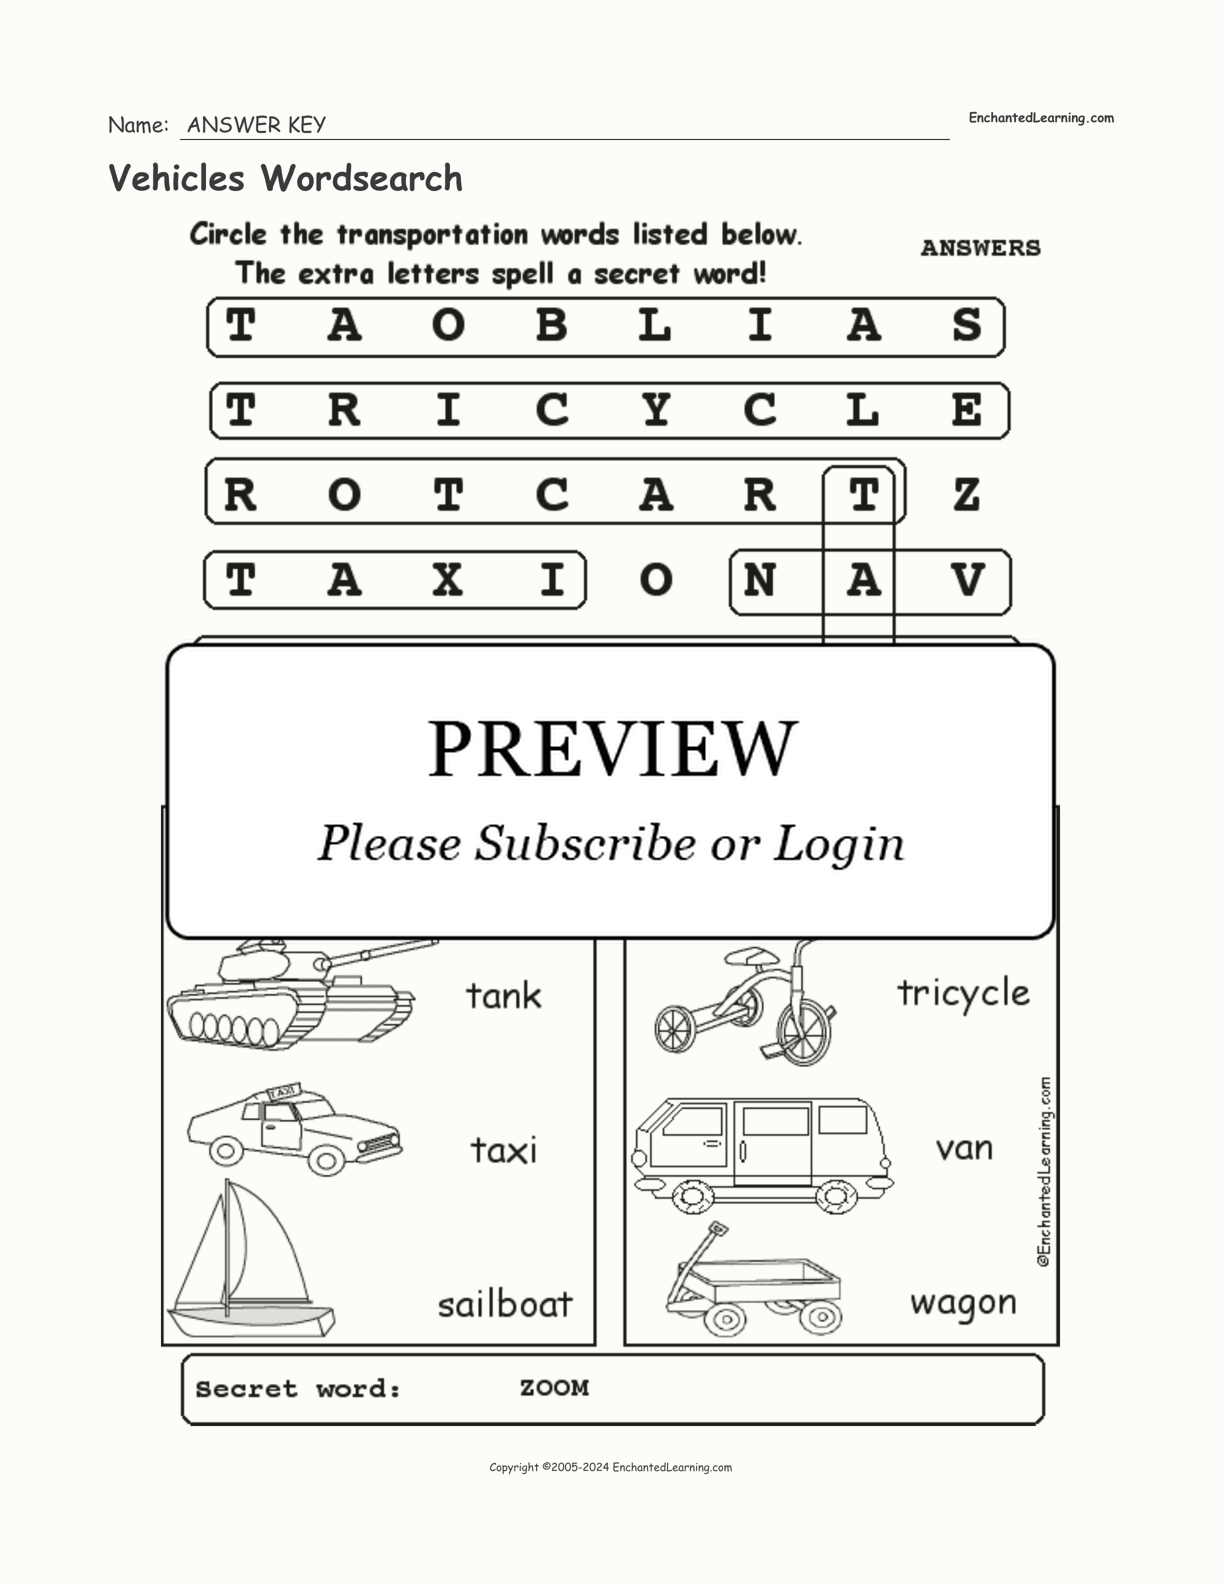 Vehicles Wordsearch interactive worksheet page 2